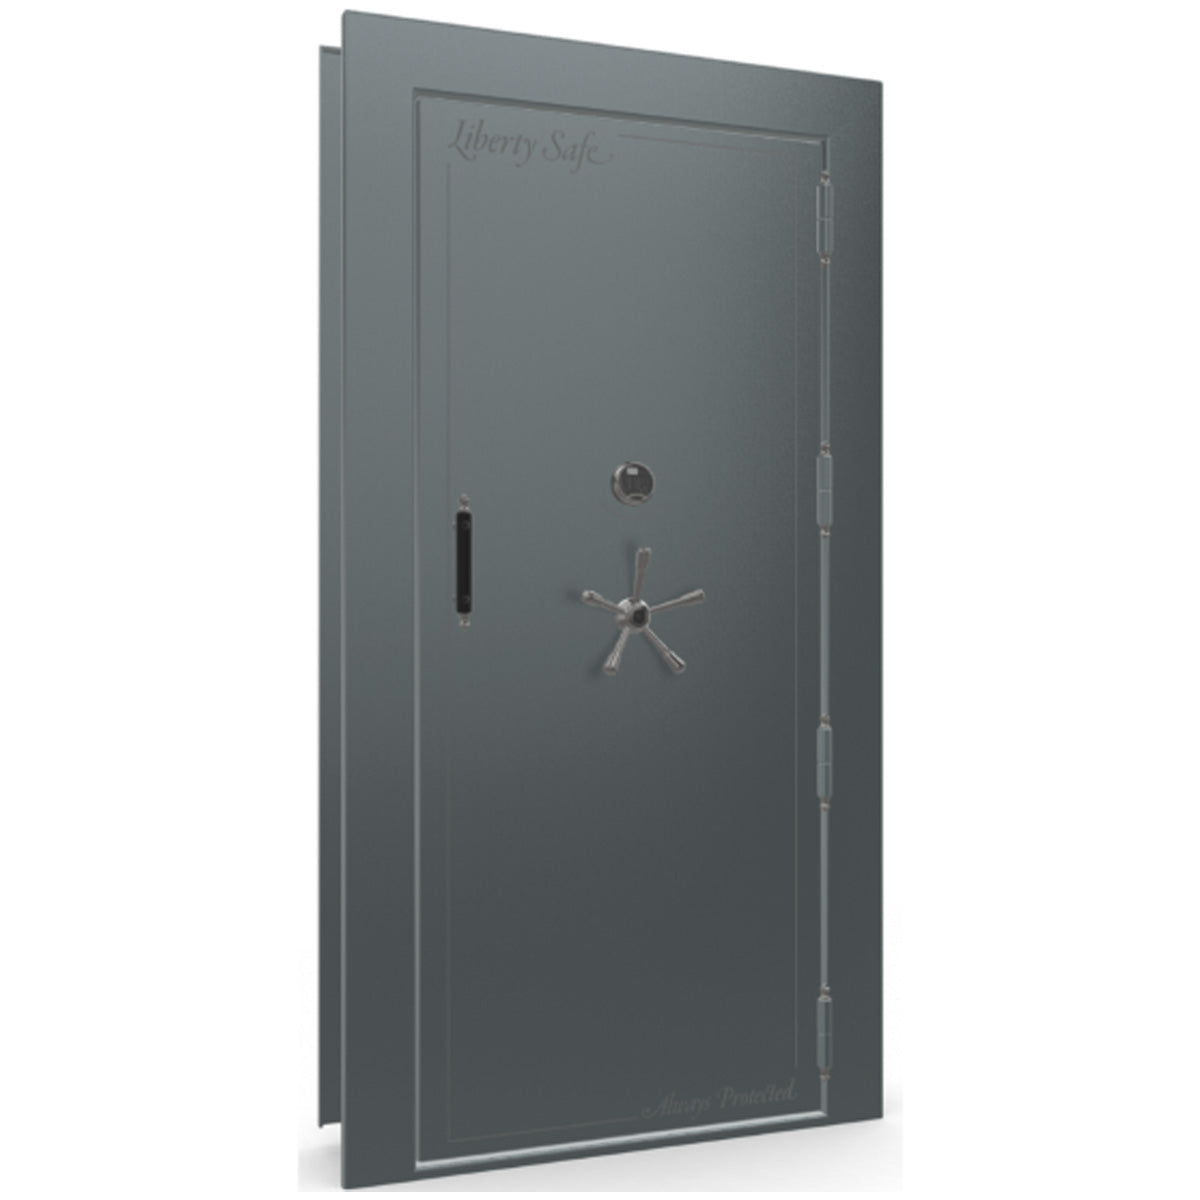 The Beast Vault Door in Forest Mist Gloss with Black Chrome Electronic Lock, Right Outswing, door closed.